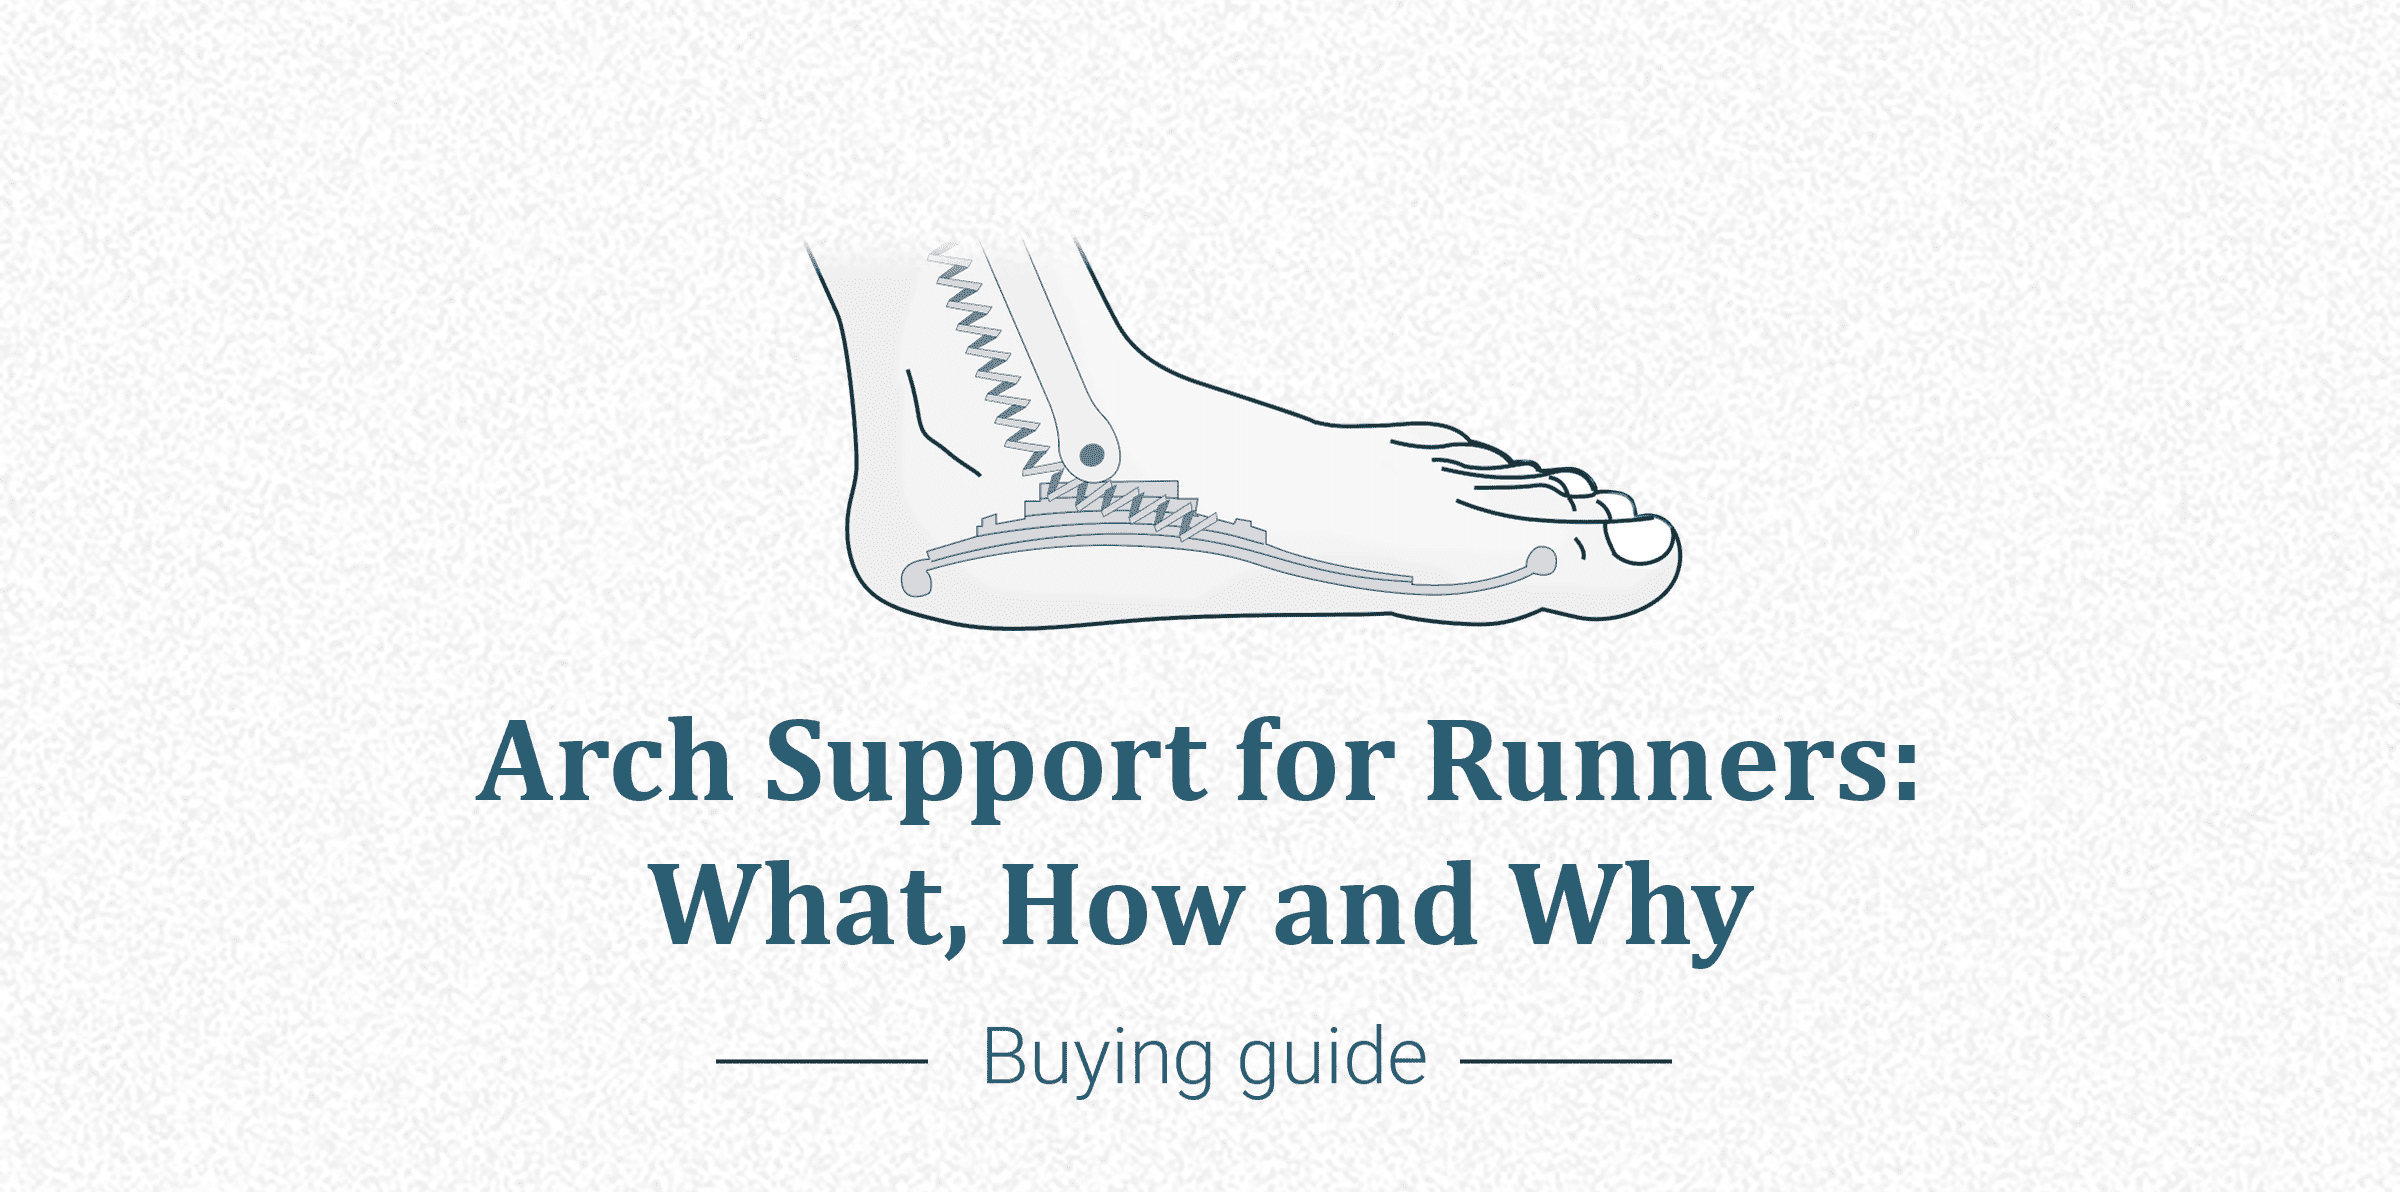 https://cdn.runrepeat.com/storage/uploads/Guide%20articles%202020/Arch%20support%20for%20runners/intrograph-for-arch-support-in-running.png